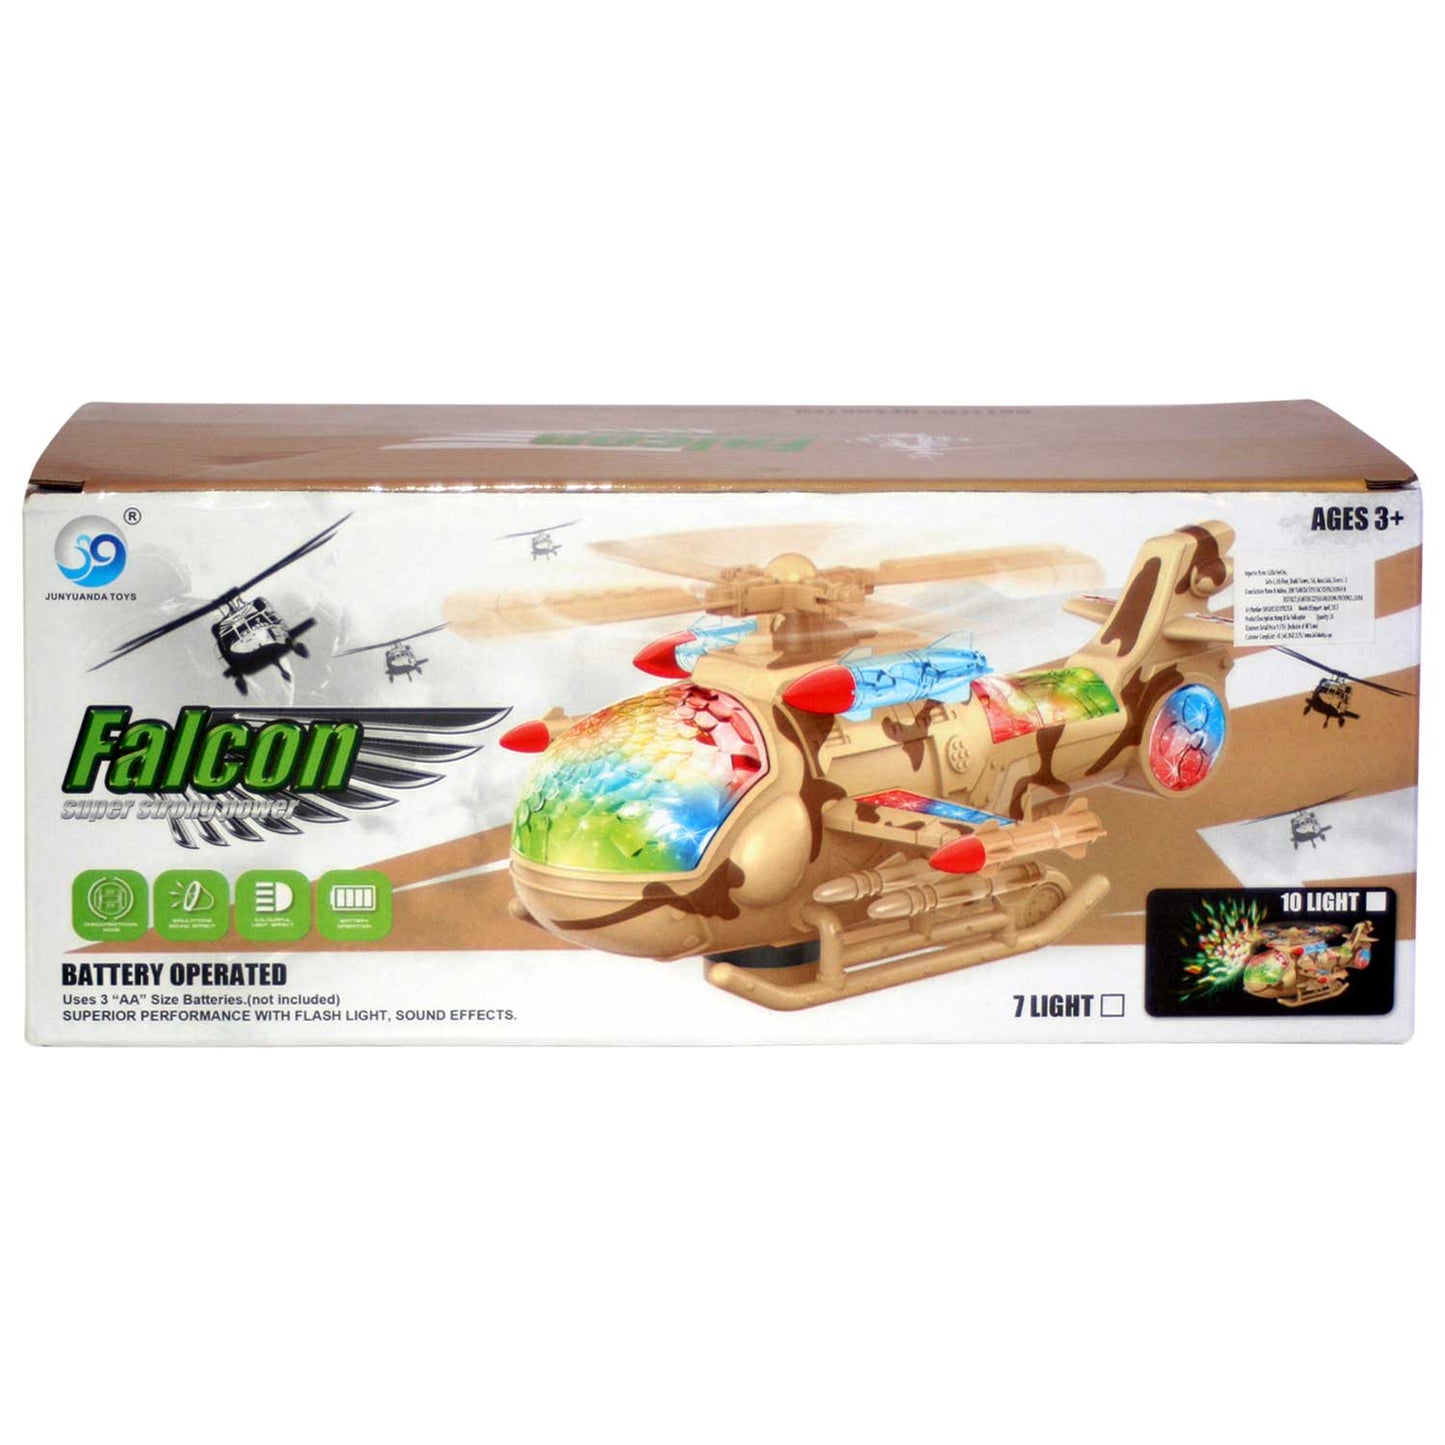 Bump & Go Helicopter(Without Packing)